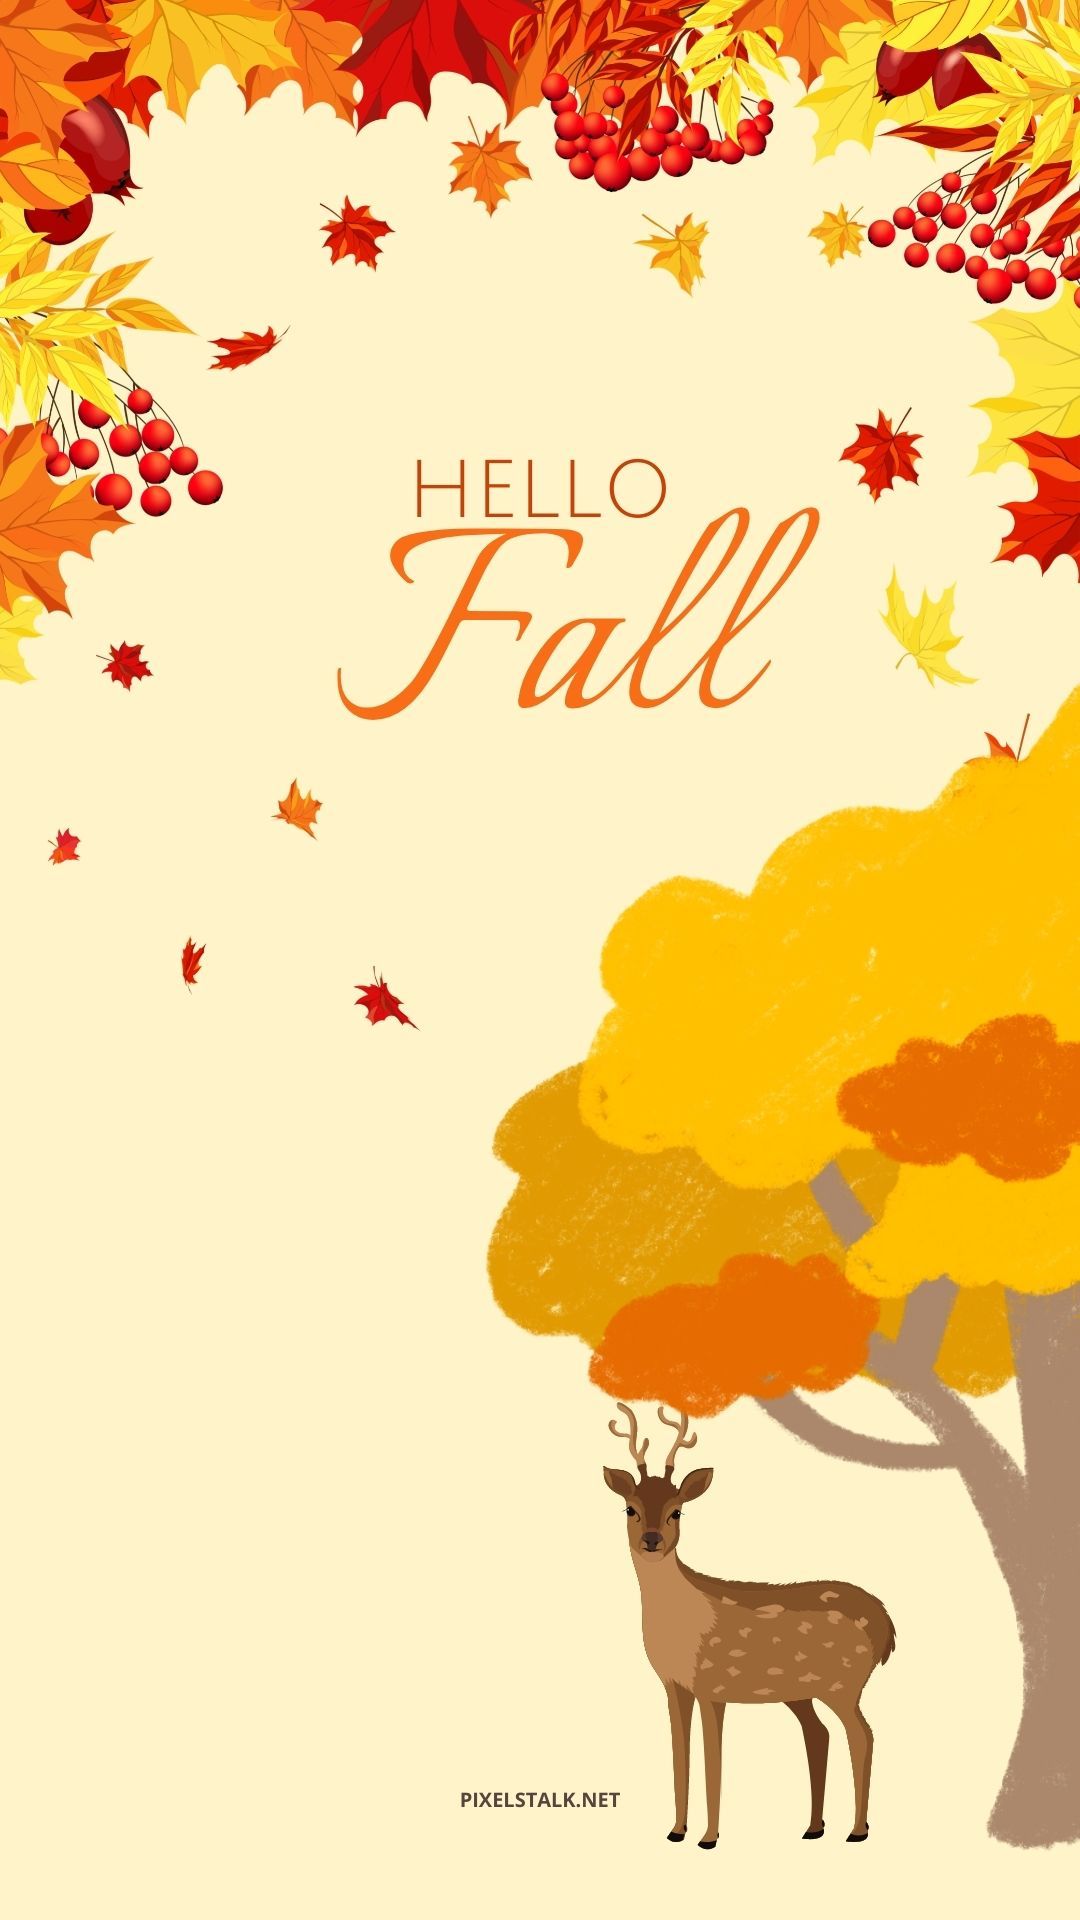 A Hello Fall card with a deer standing under a tree with colorful leaves - Fall